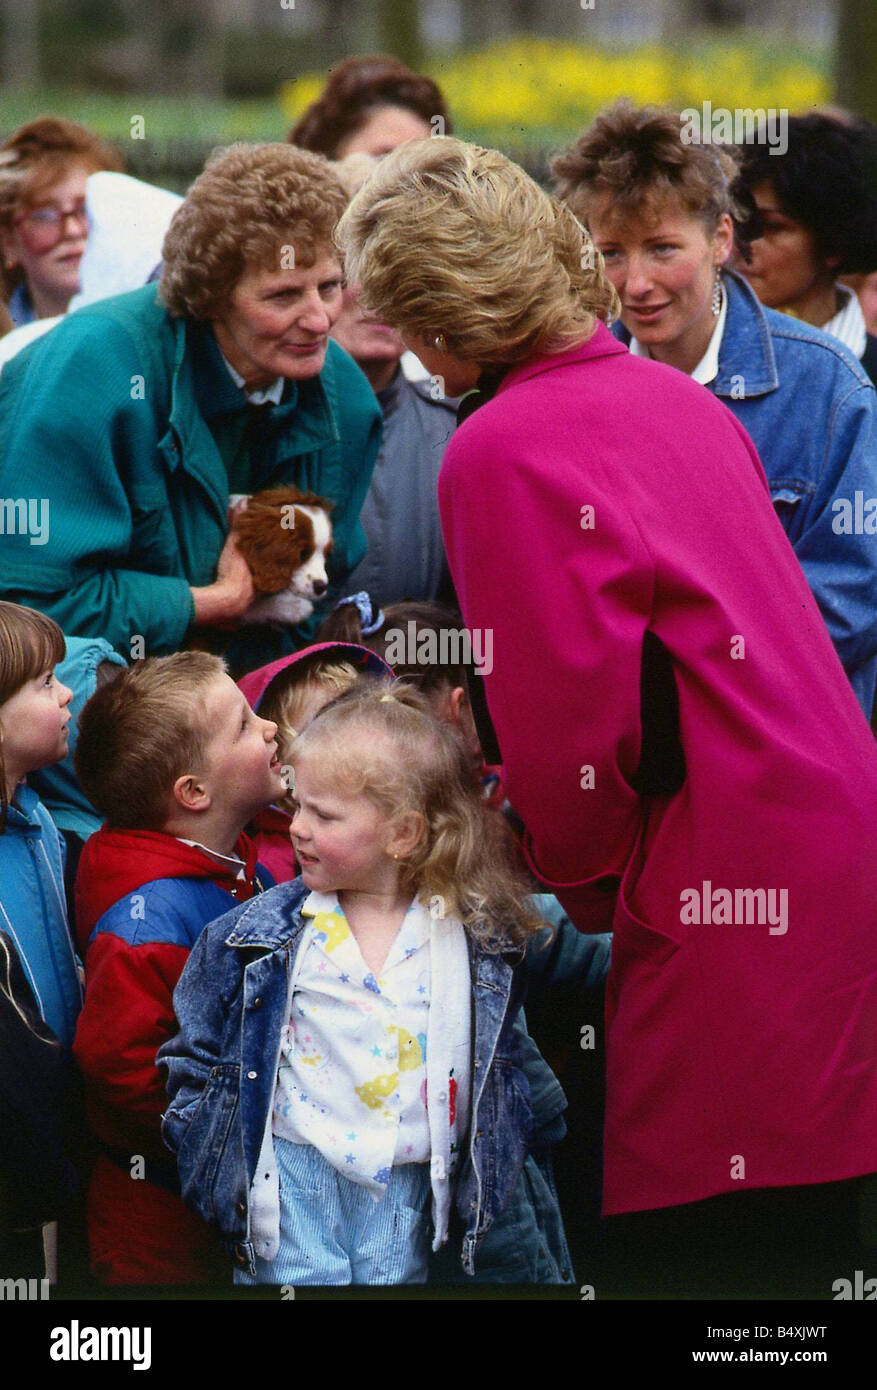 Princess Diana Princess of Wales August 1989 talking to a woman in the crowd on a visit to Aberdeen red jacket Princess Diana Scotland Stock Photo